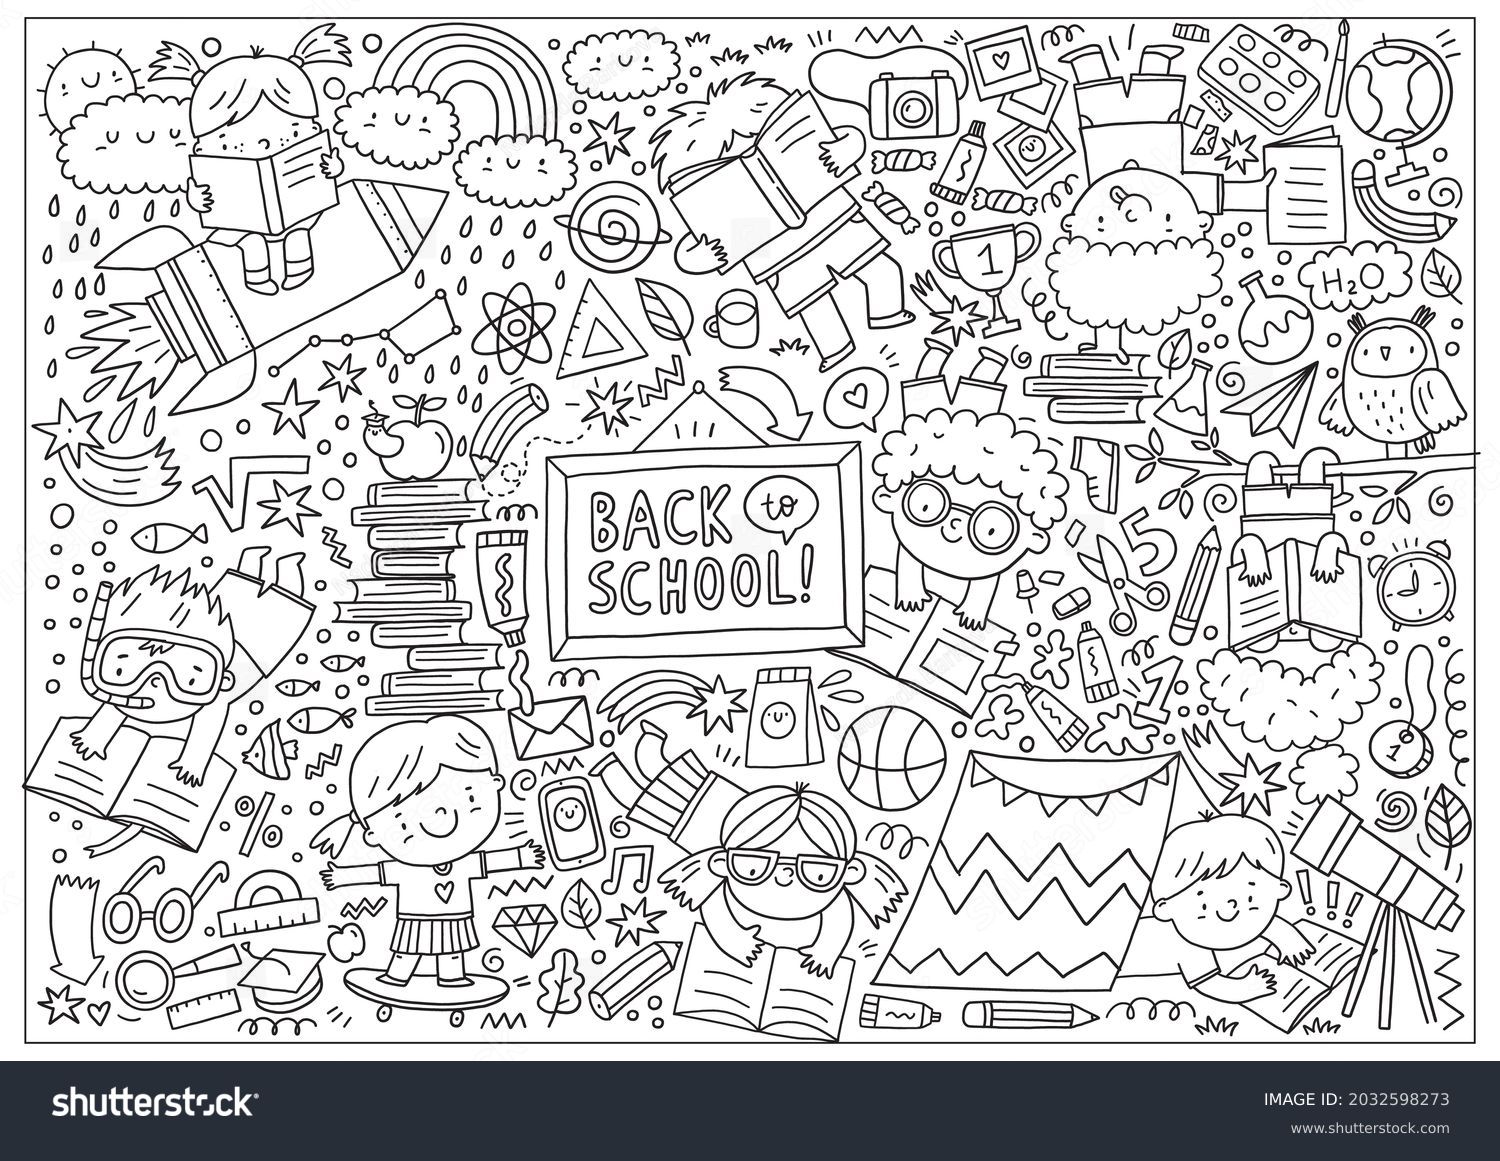 School coloring pages images stock photos d objects vectors